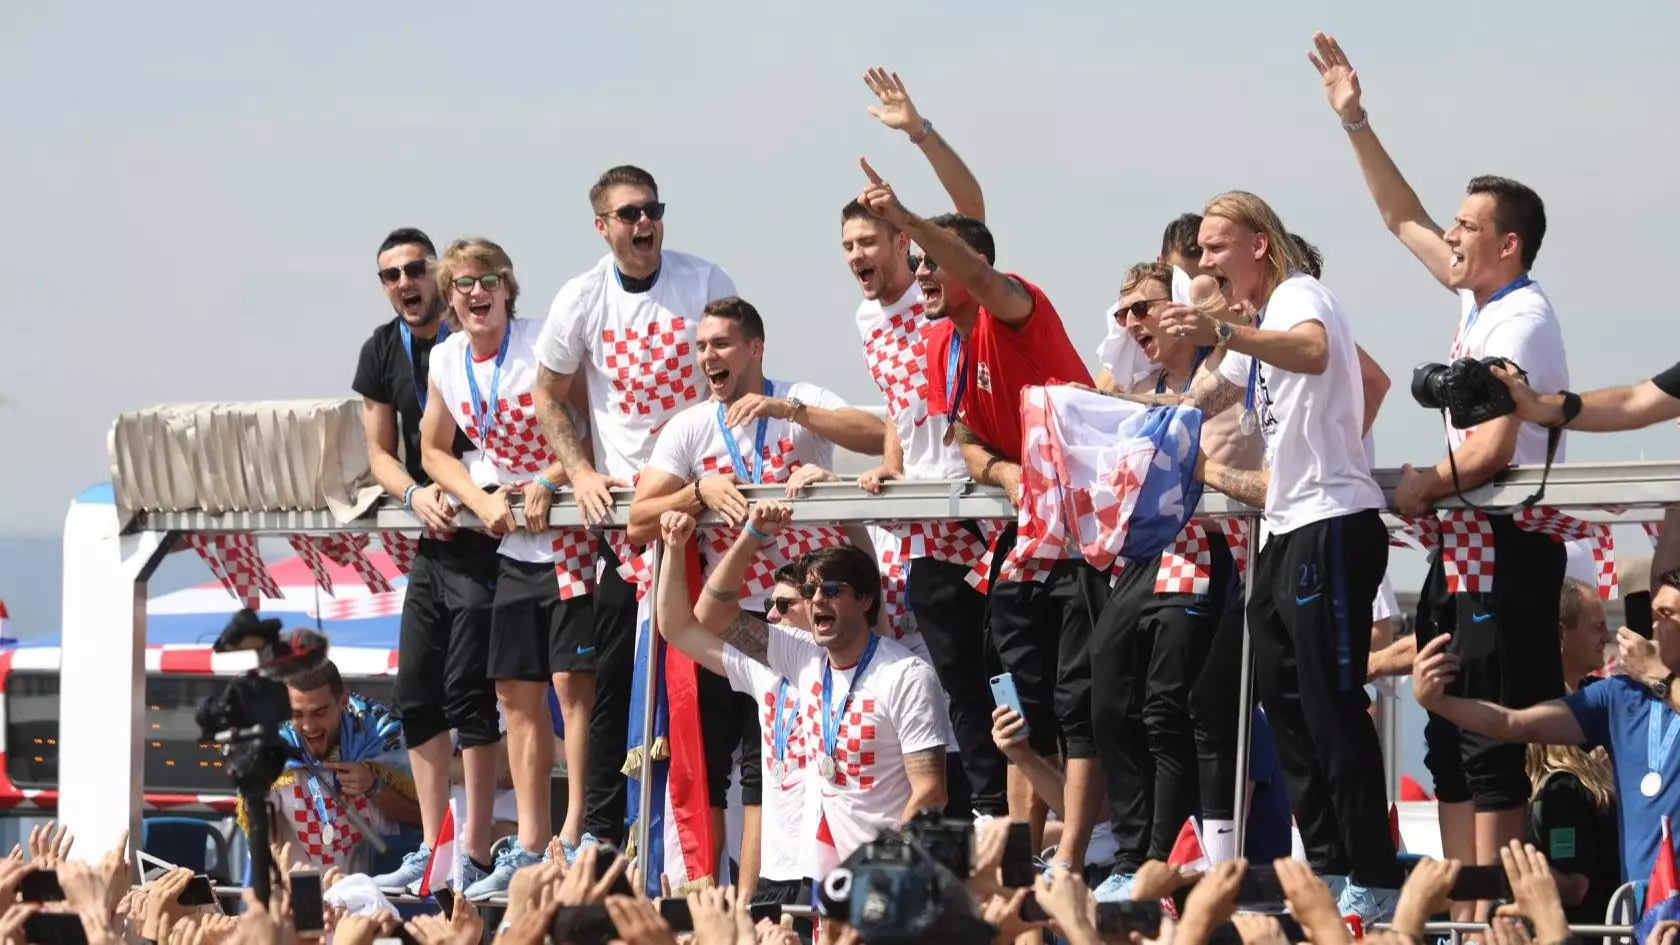 Croatia National Team Will Donate World Cup Prize Money To Children's Charity